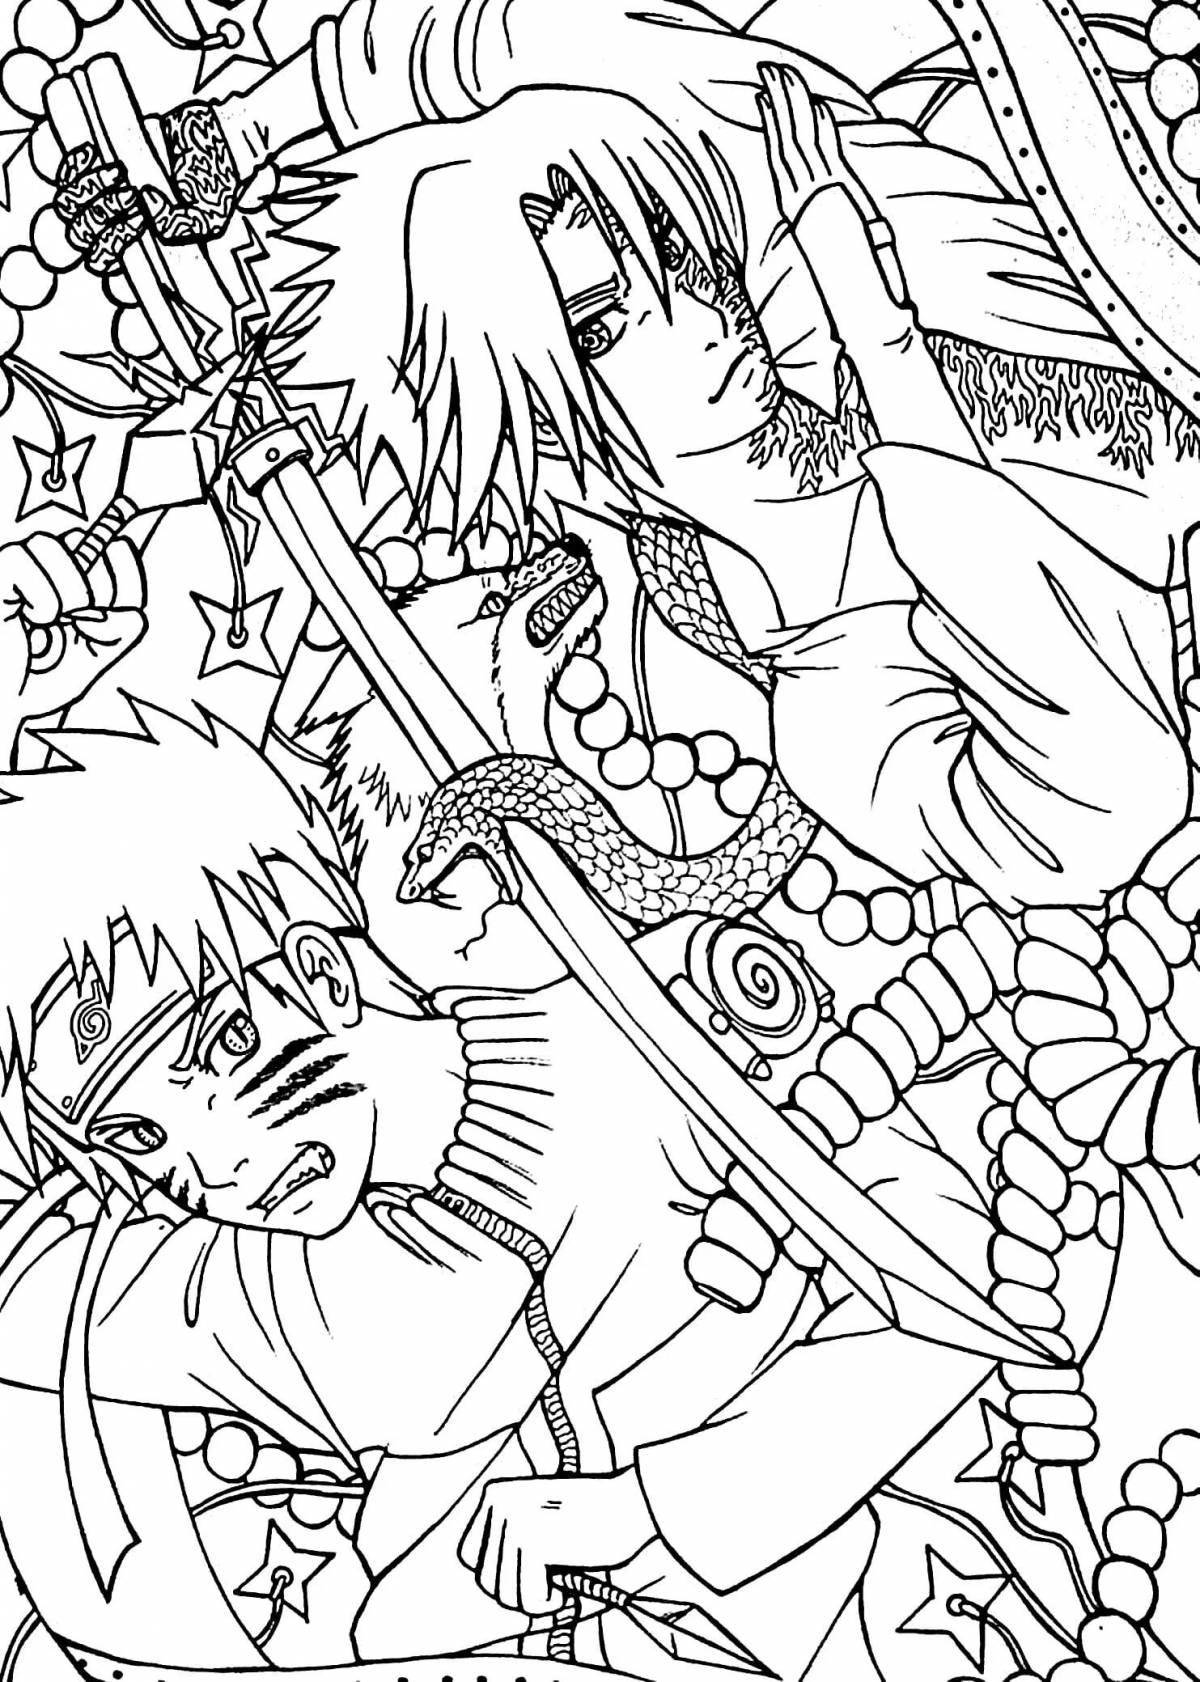 Awesome naruto coloring pages for boys